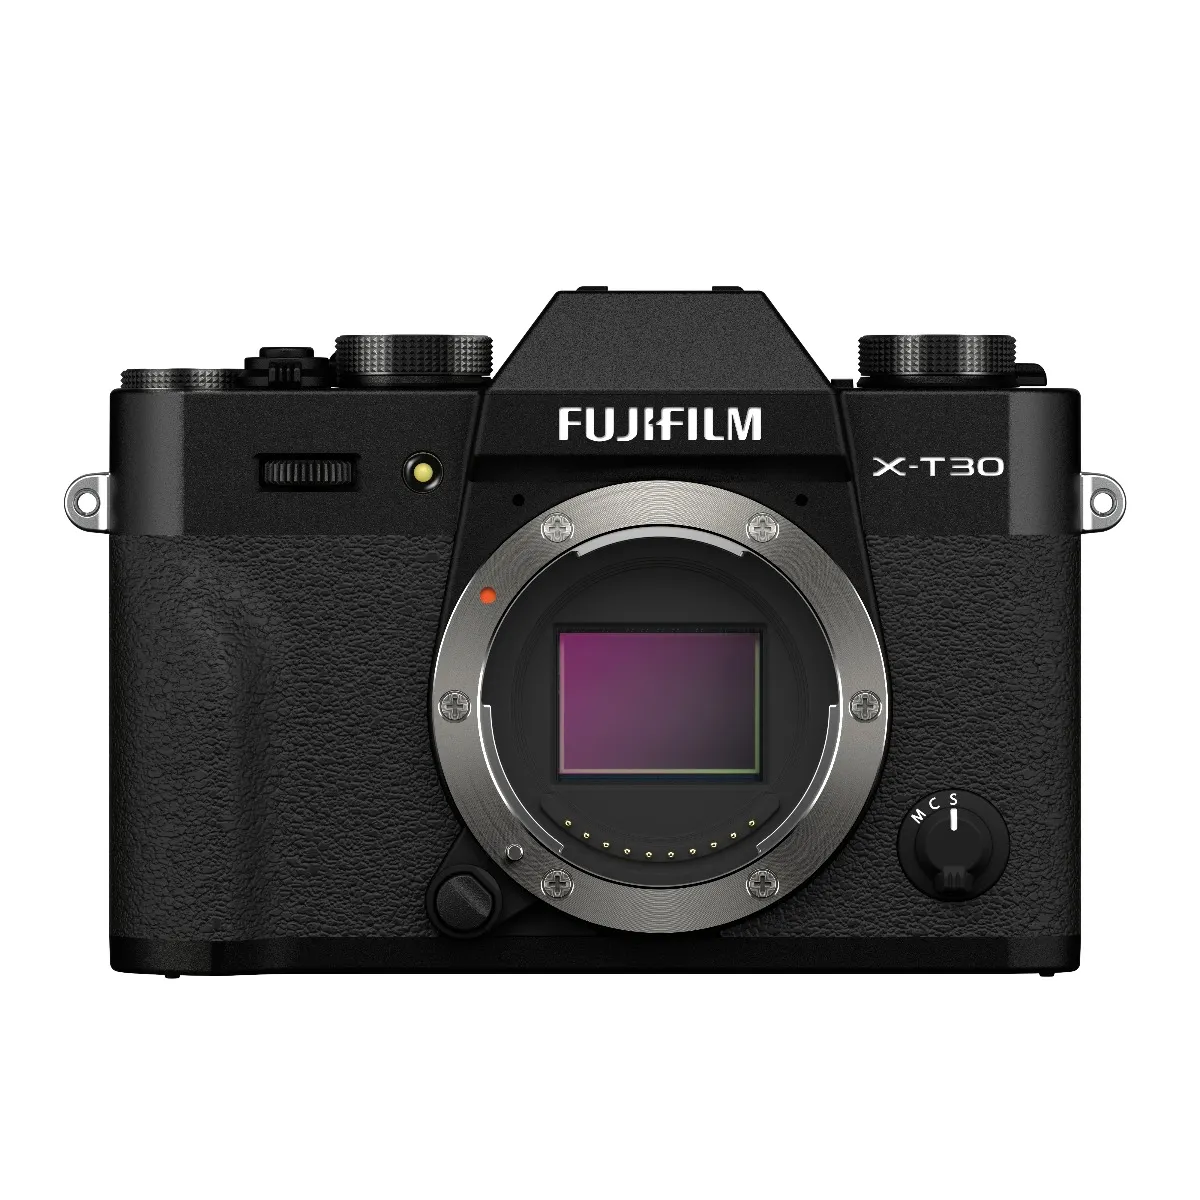 Image of Fujifilm X-T30 Type II Black Body Only Compact System Camera